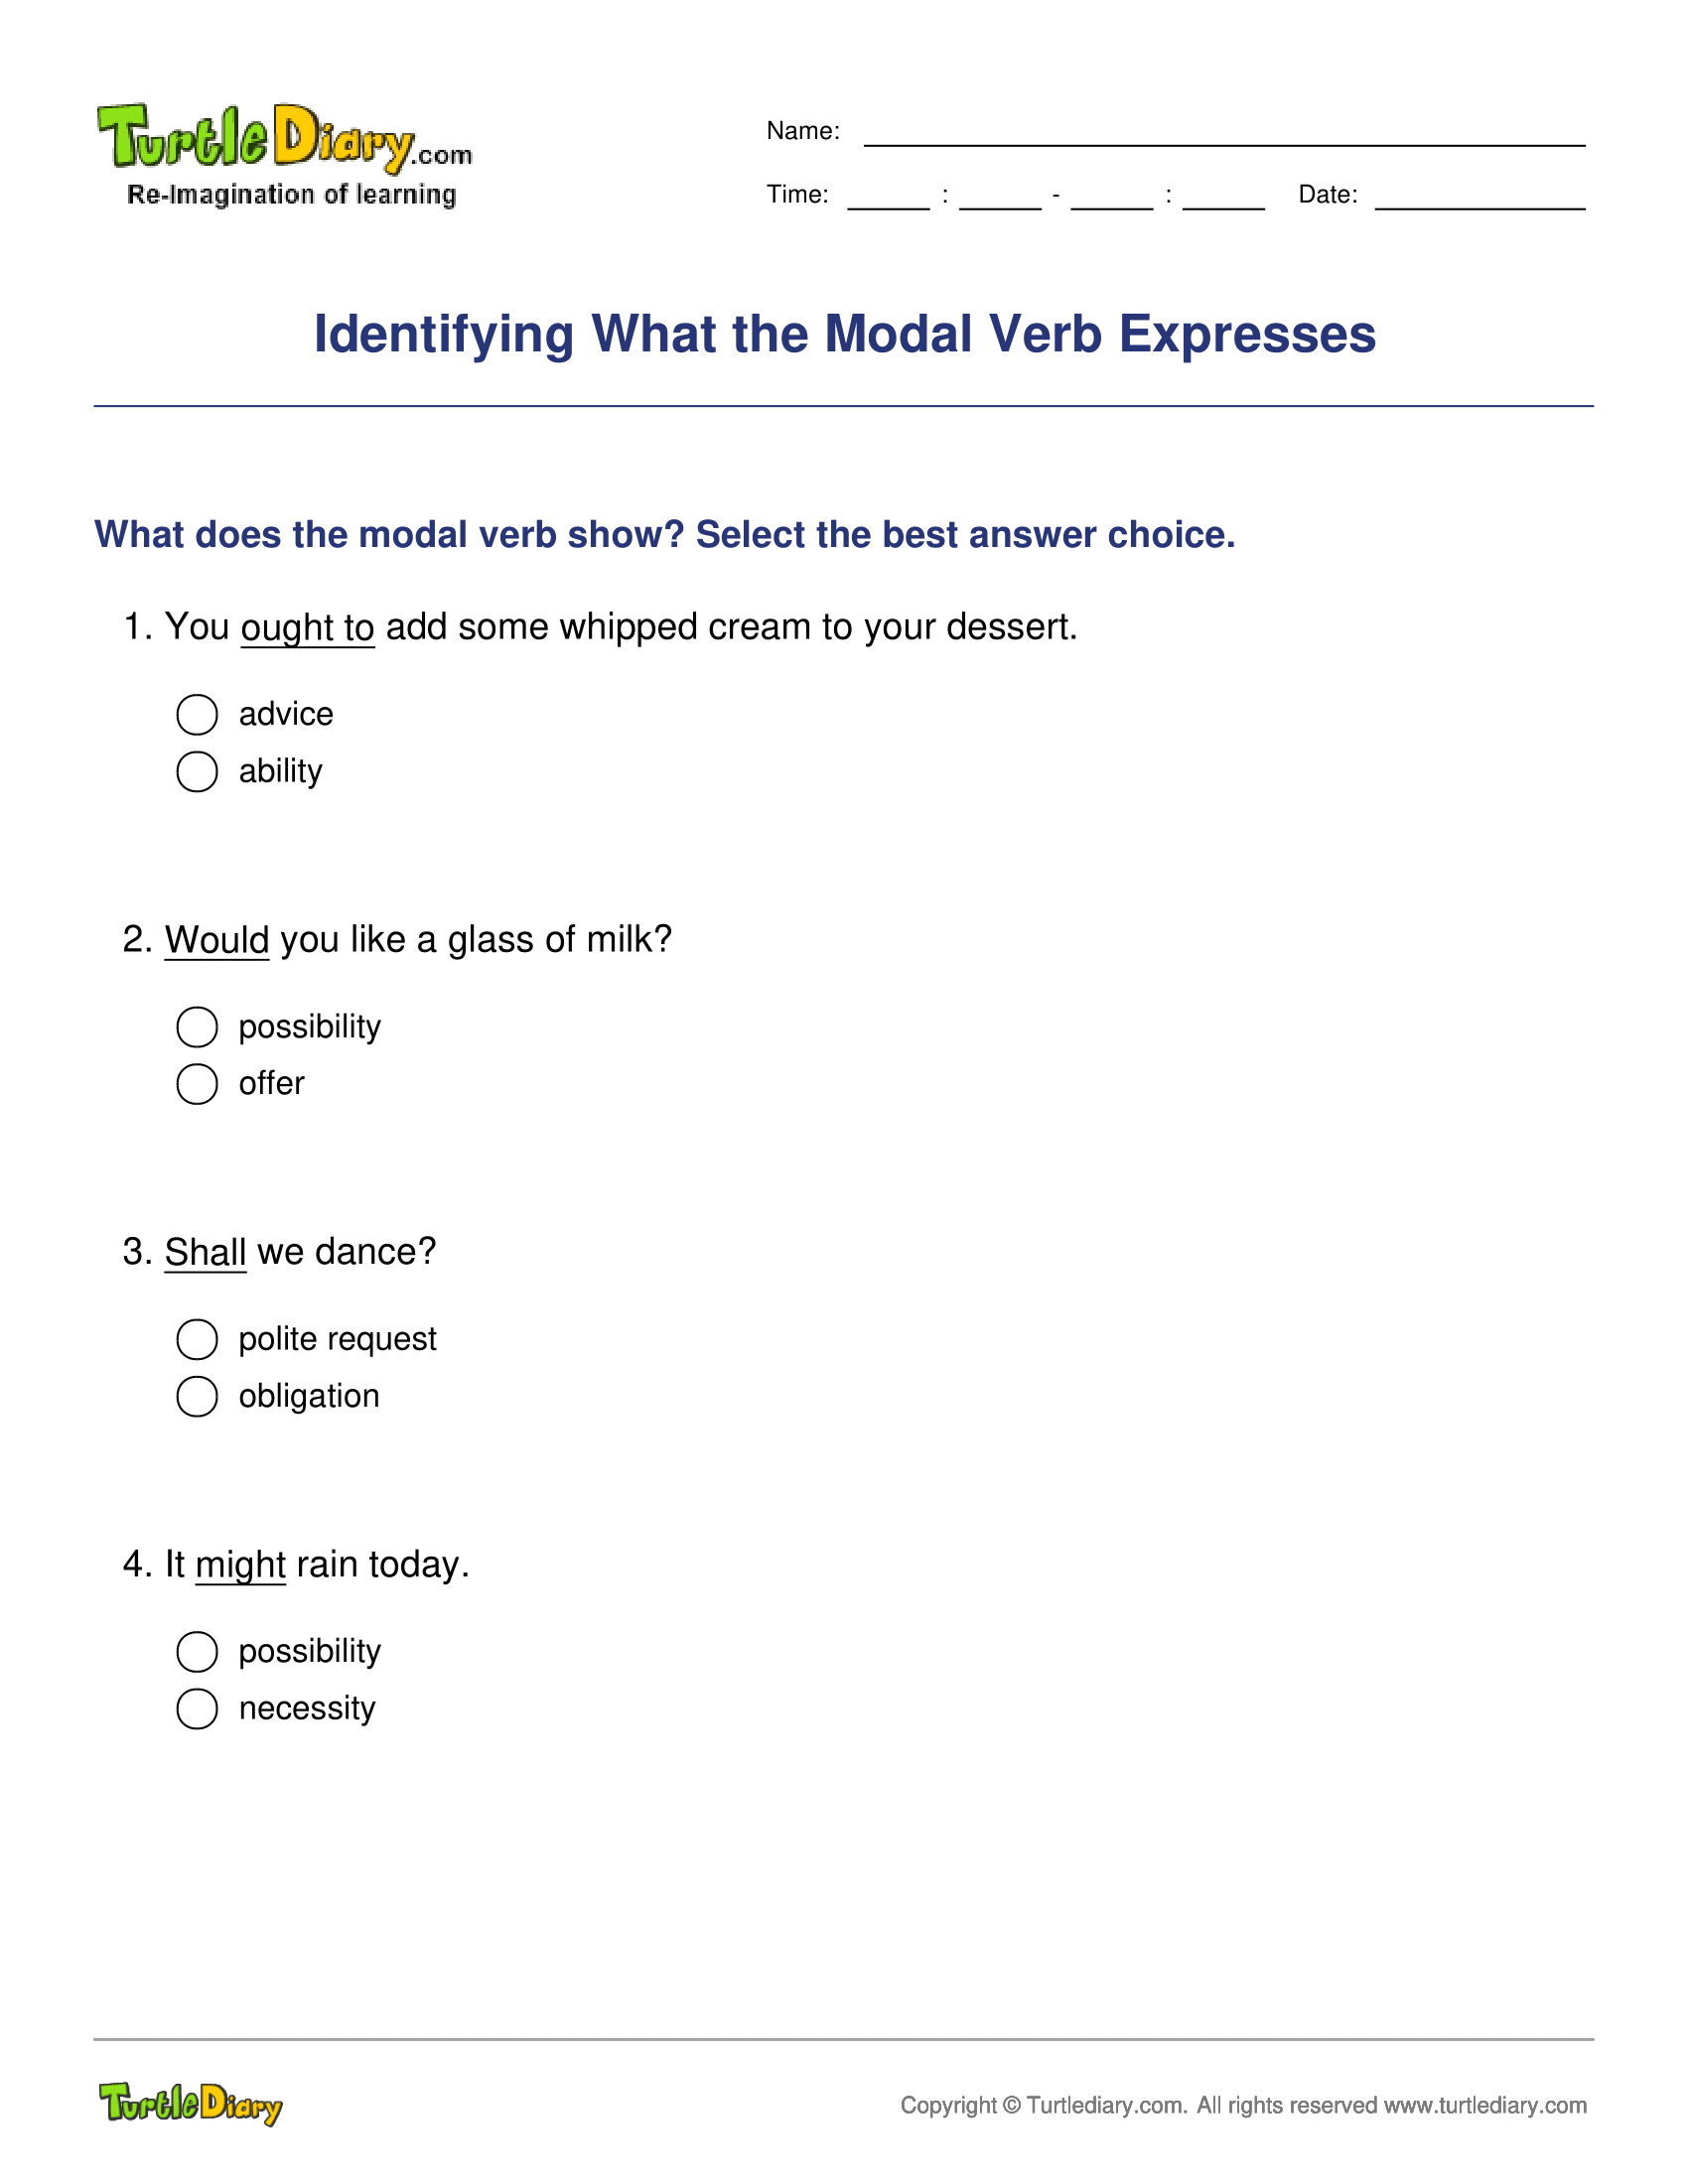 Identifying What the Modal Verb Expresses